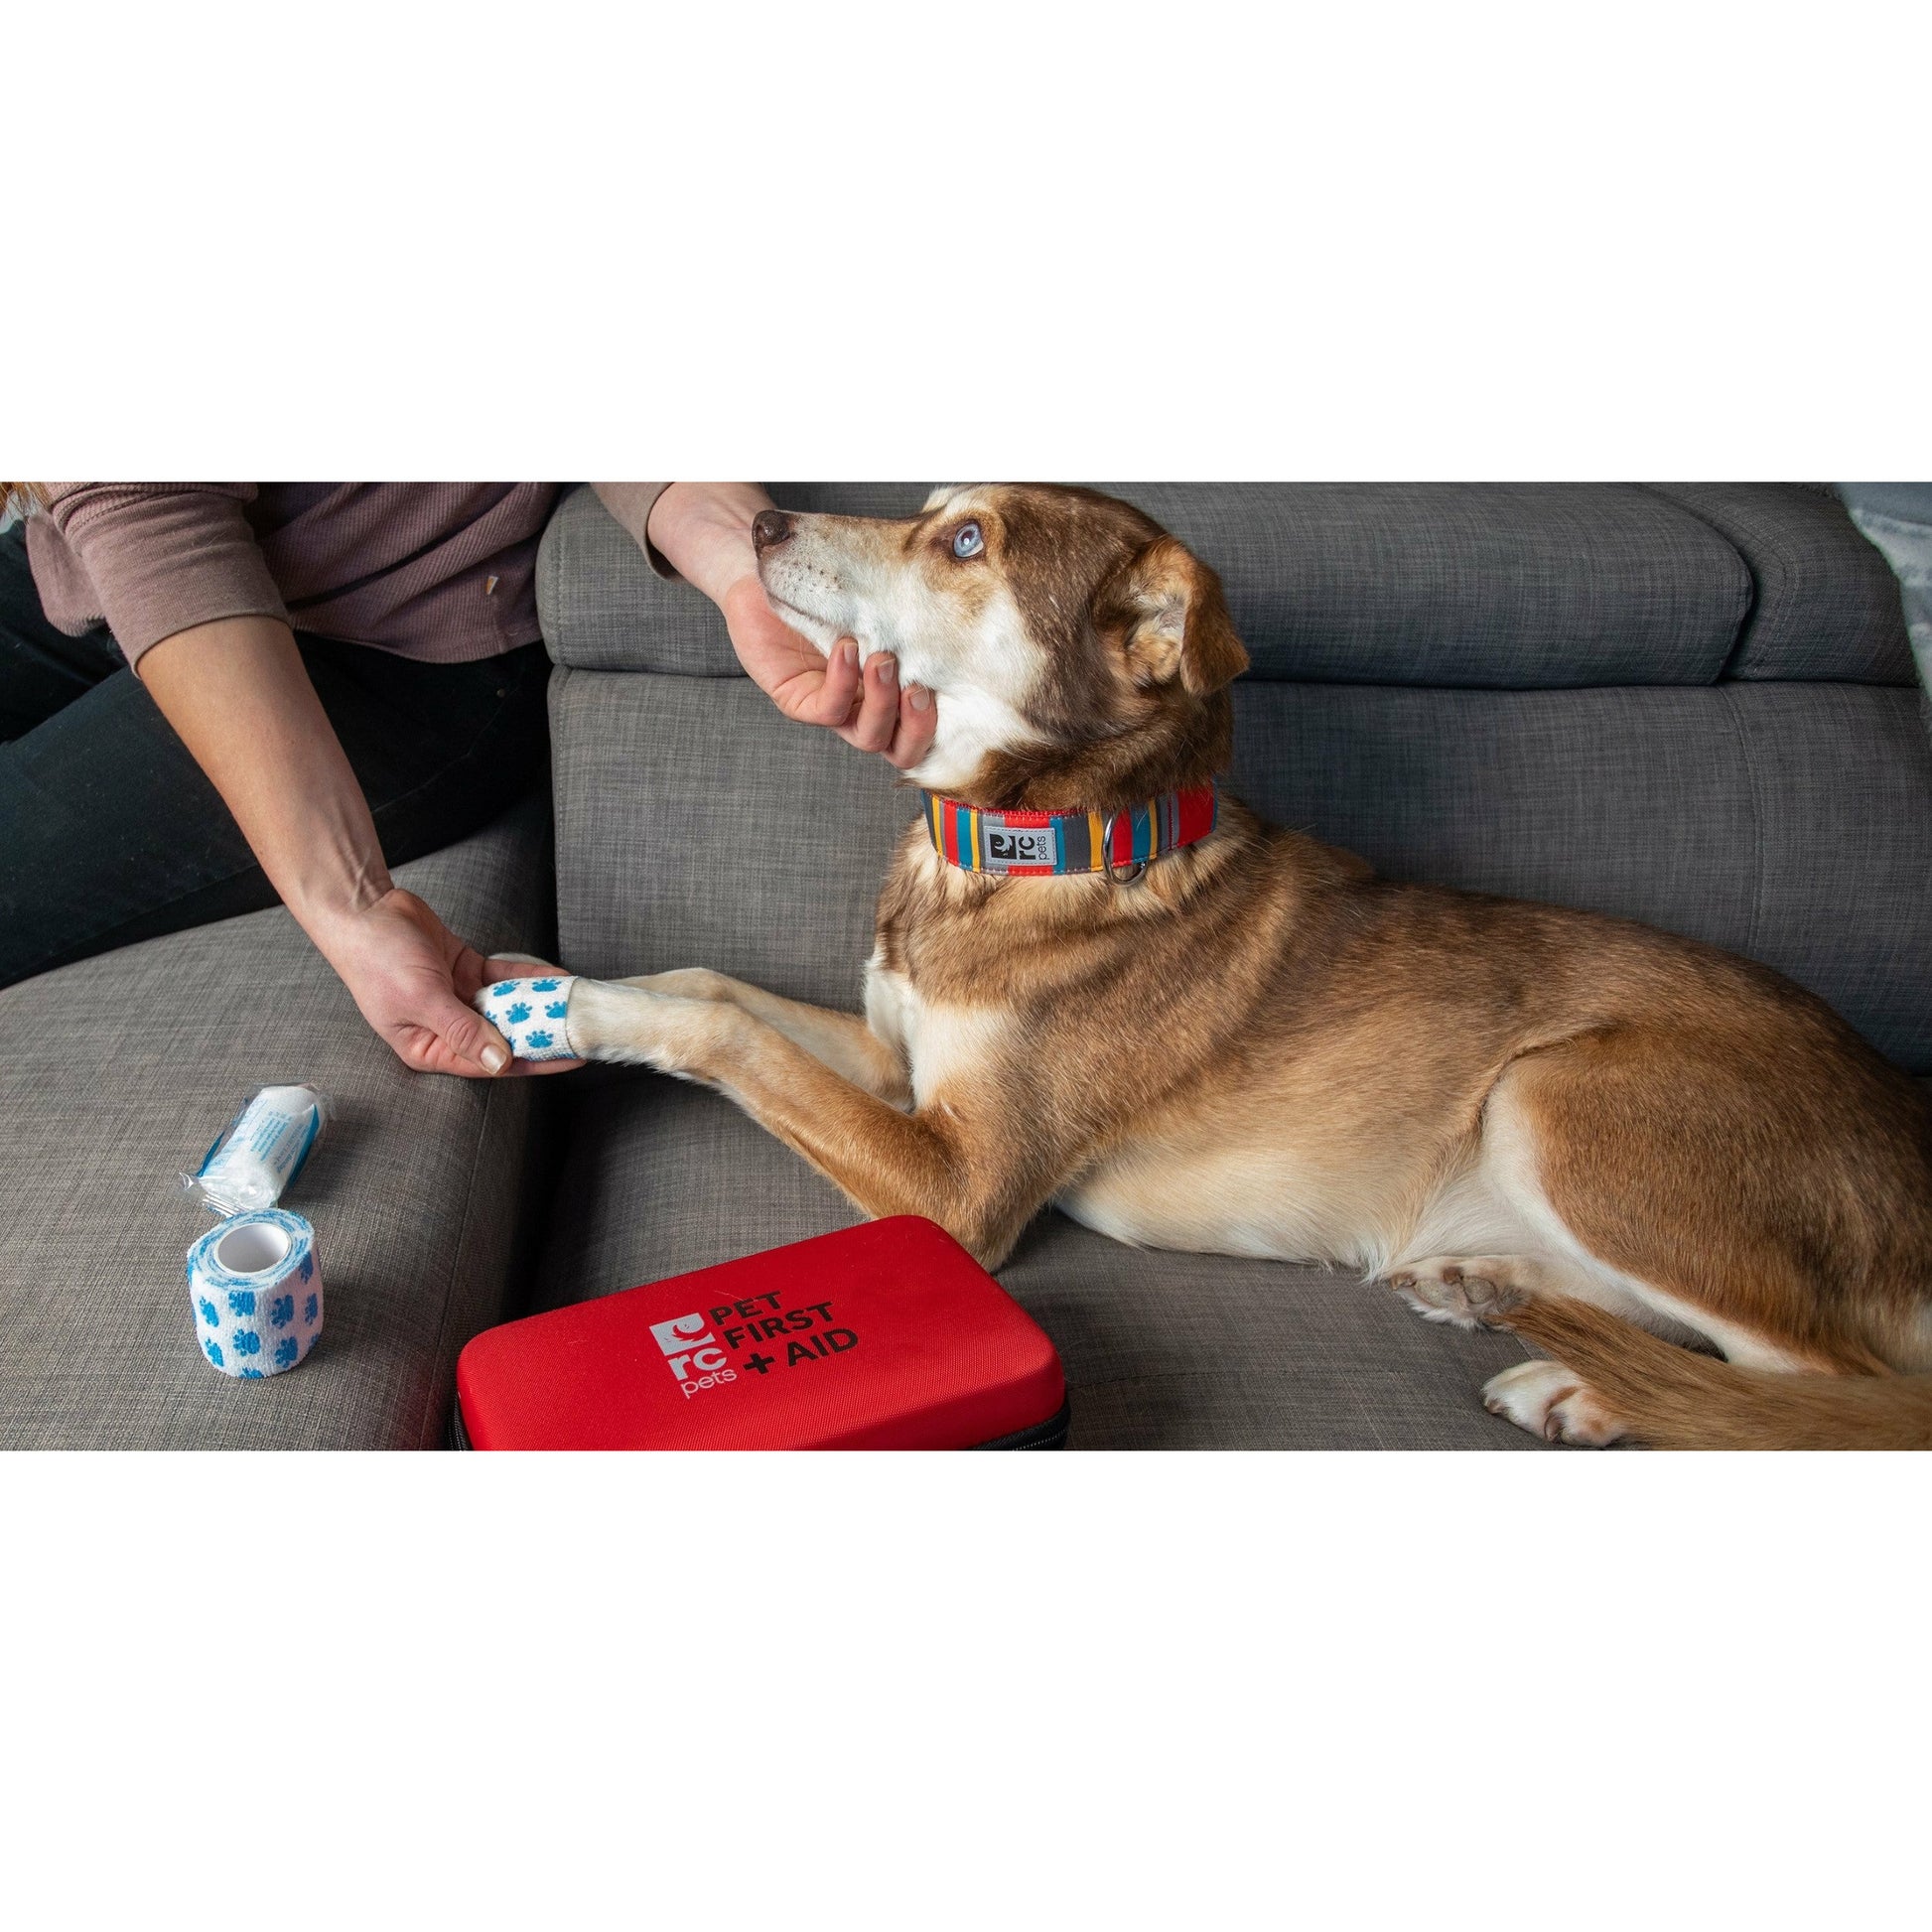 RC Pet First Aid Kit  Health Care  | PetMax Canada